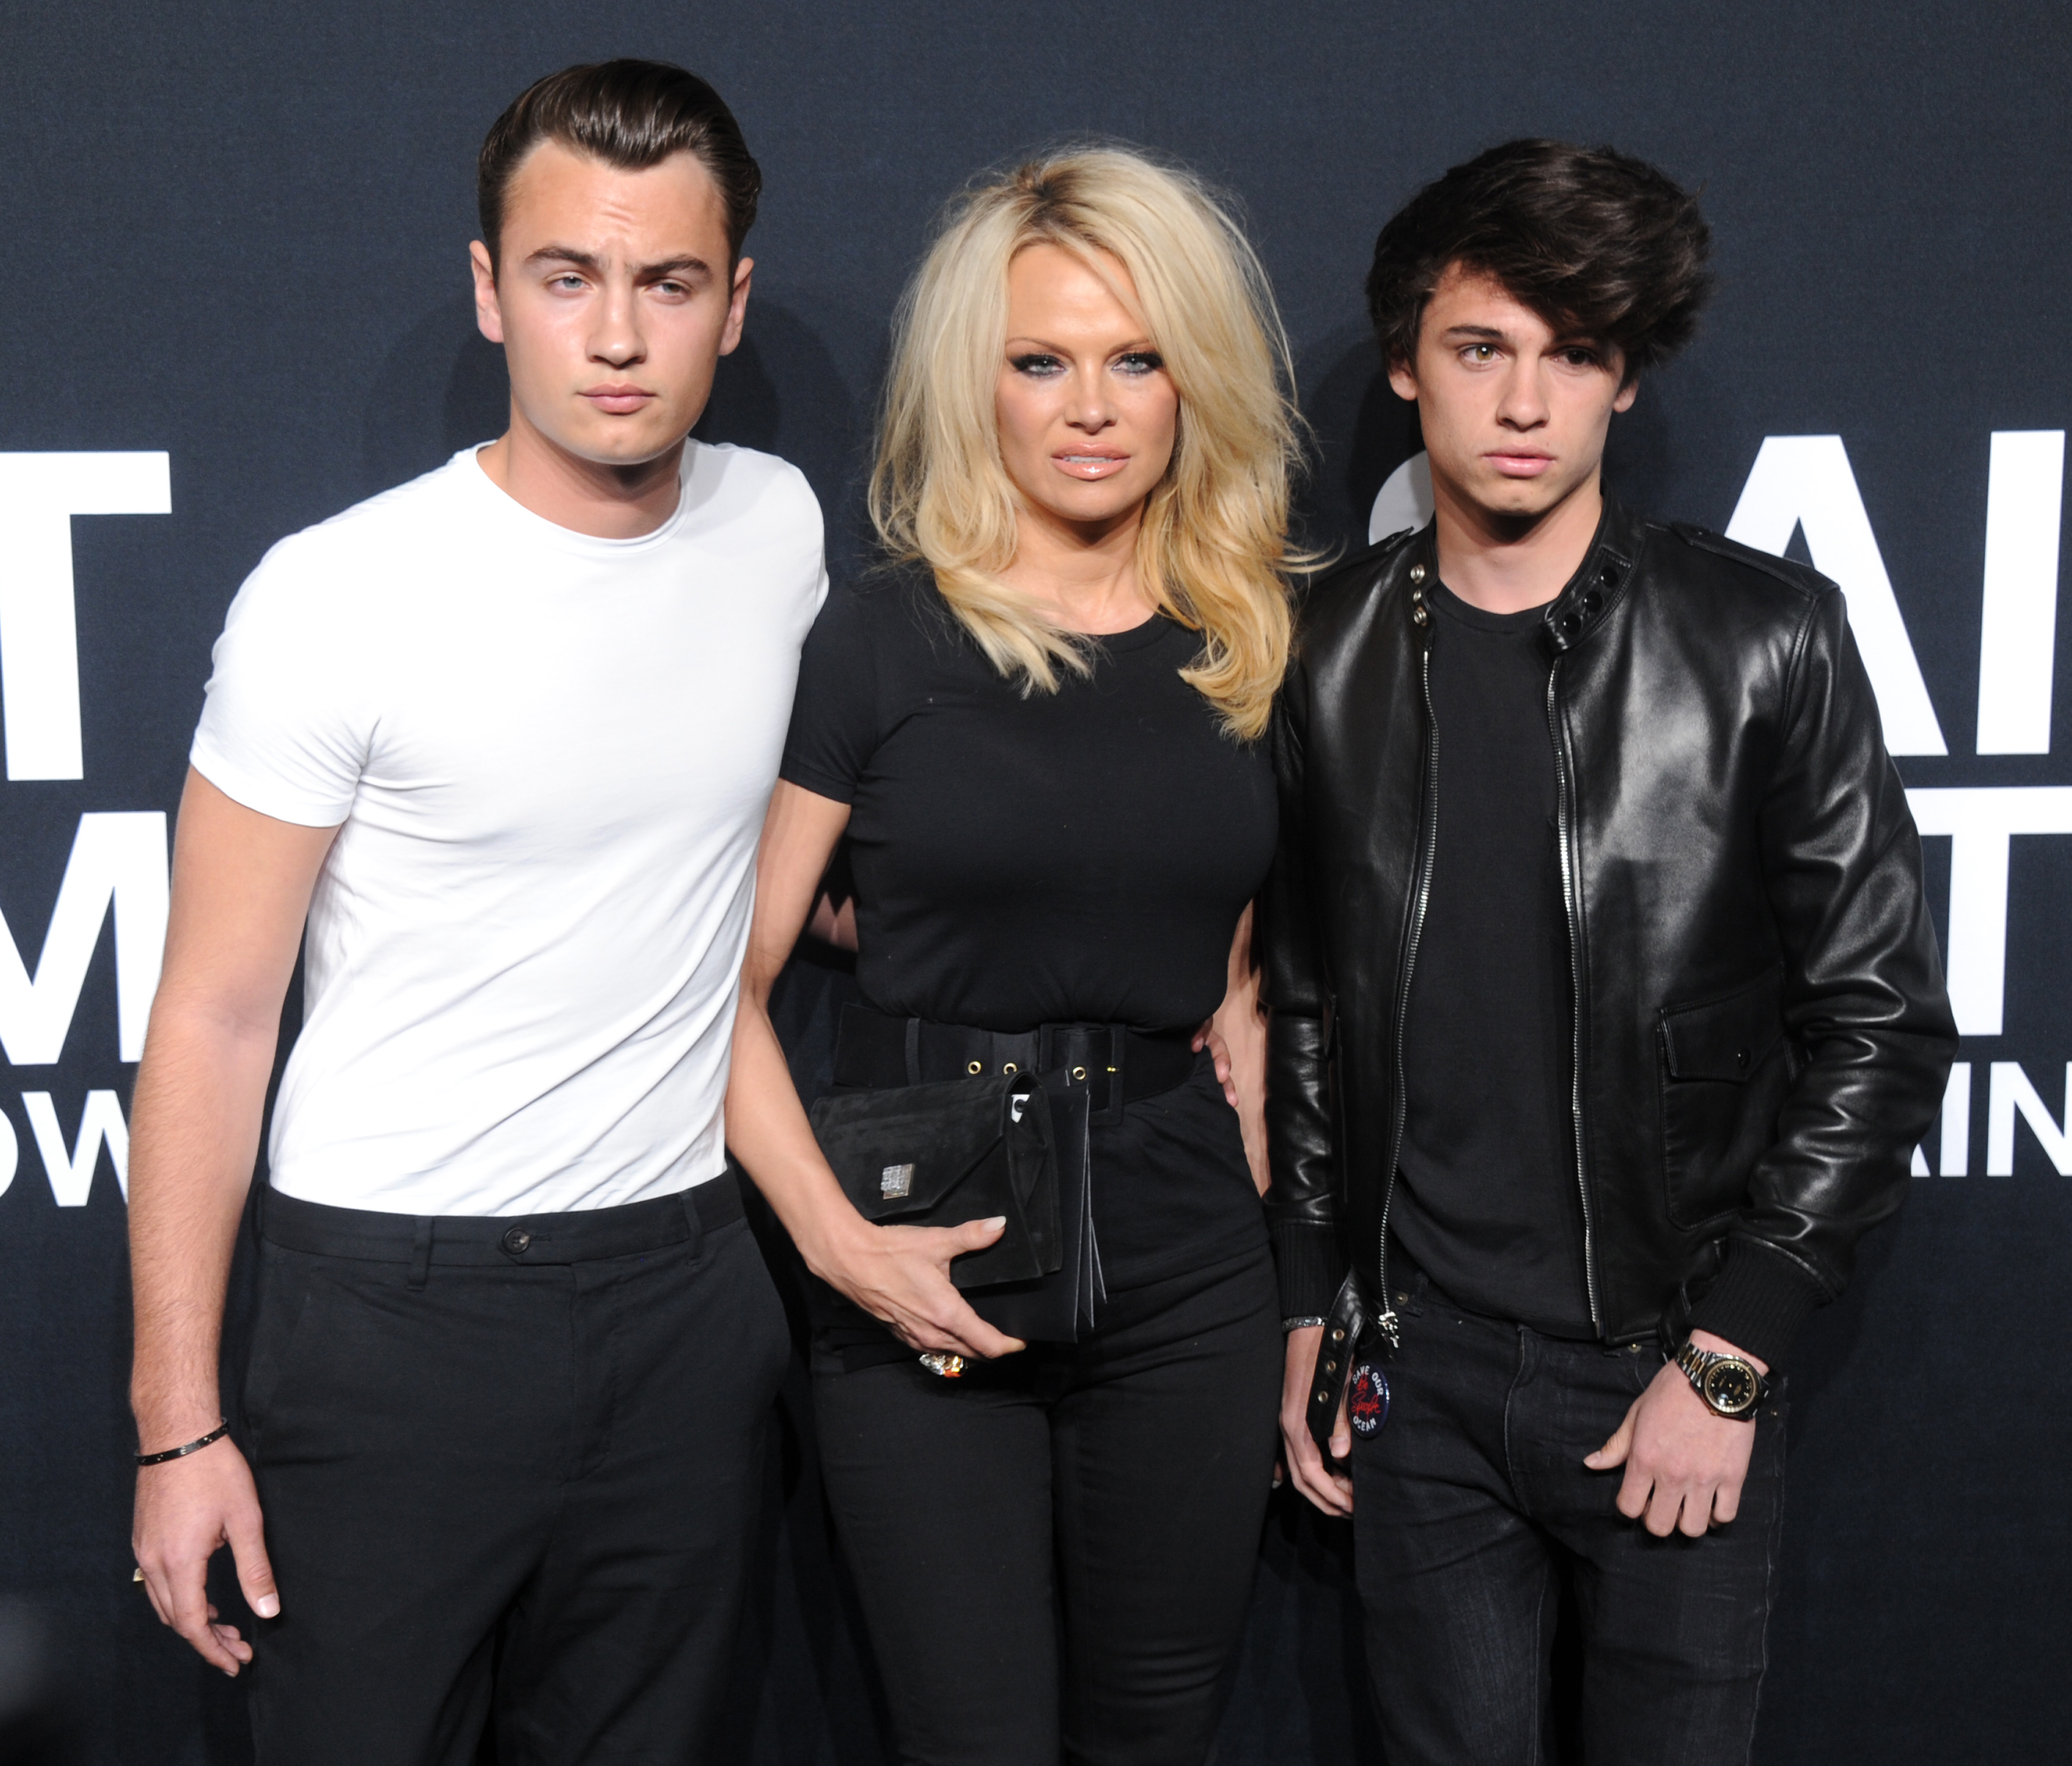 Pamela Anderson with Brandon and Dylan Lee at the Saint Laurent show at The Hollywood Palladium in Los Angeles, California on February 10, 2016 | Source: Getty Images